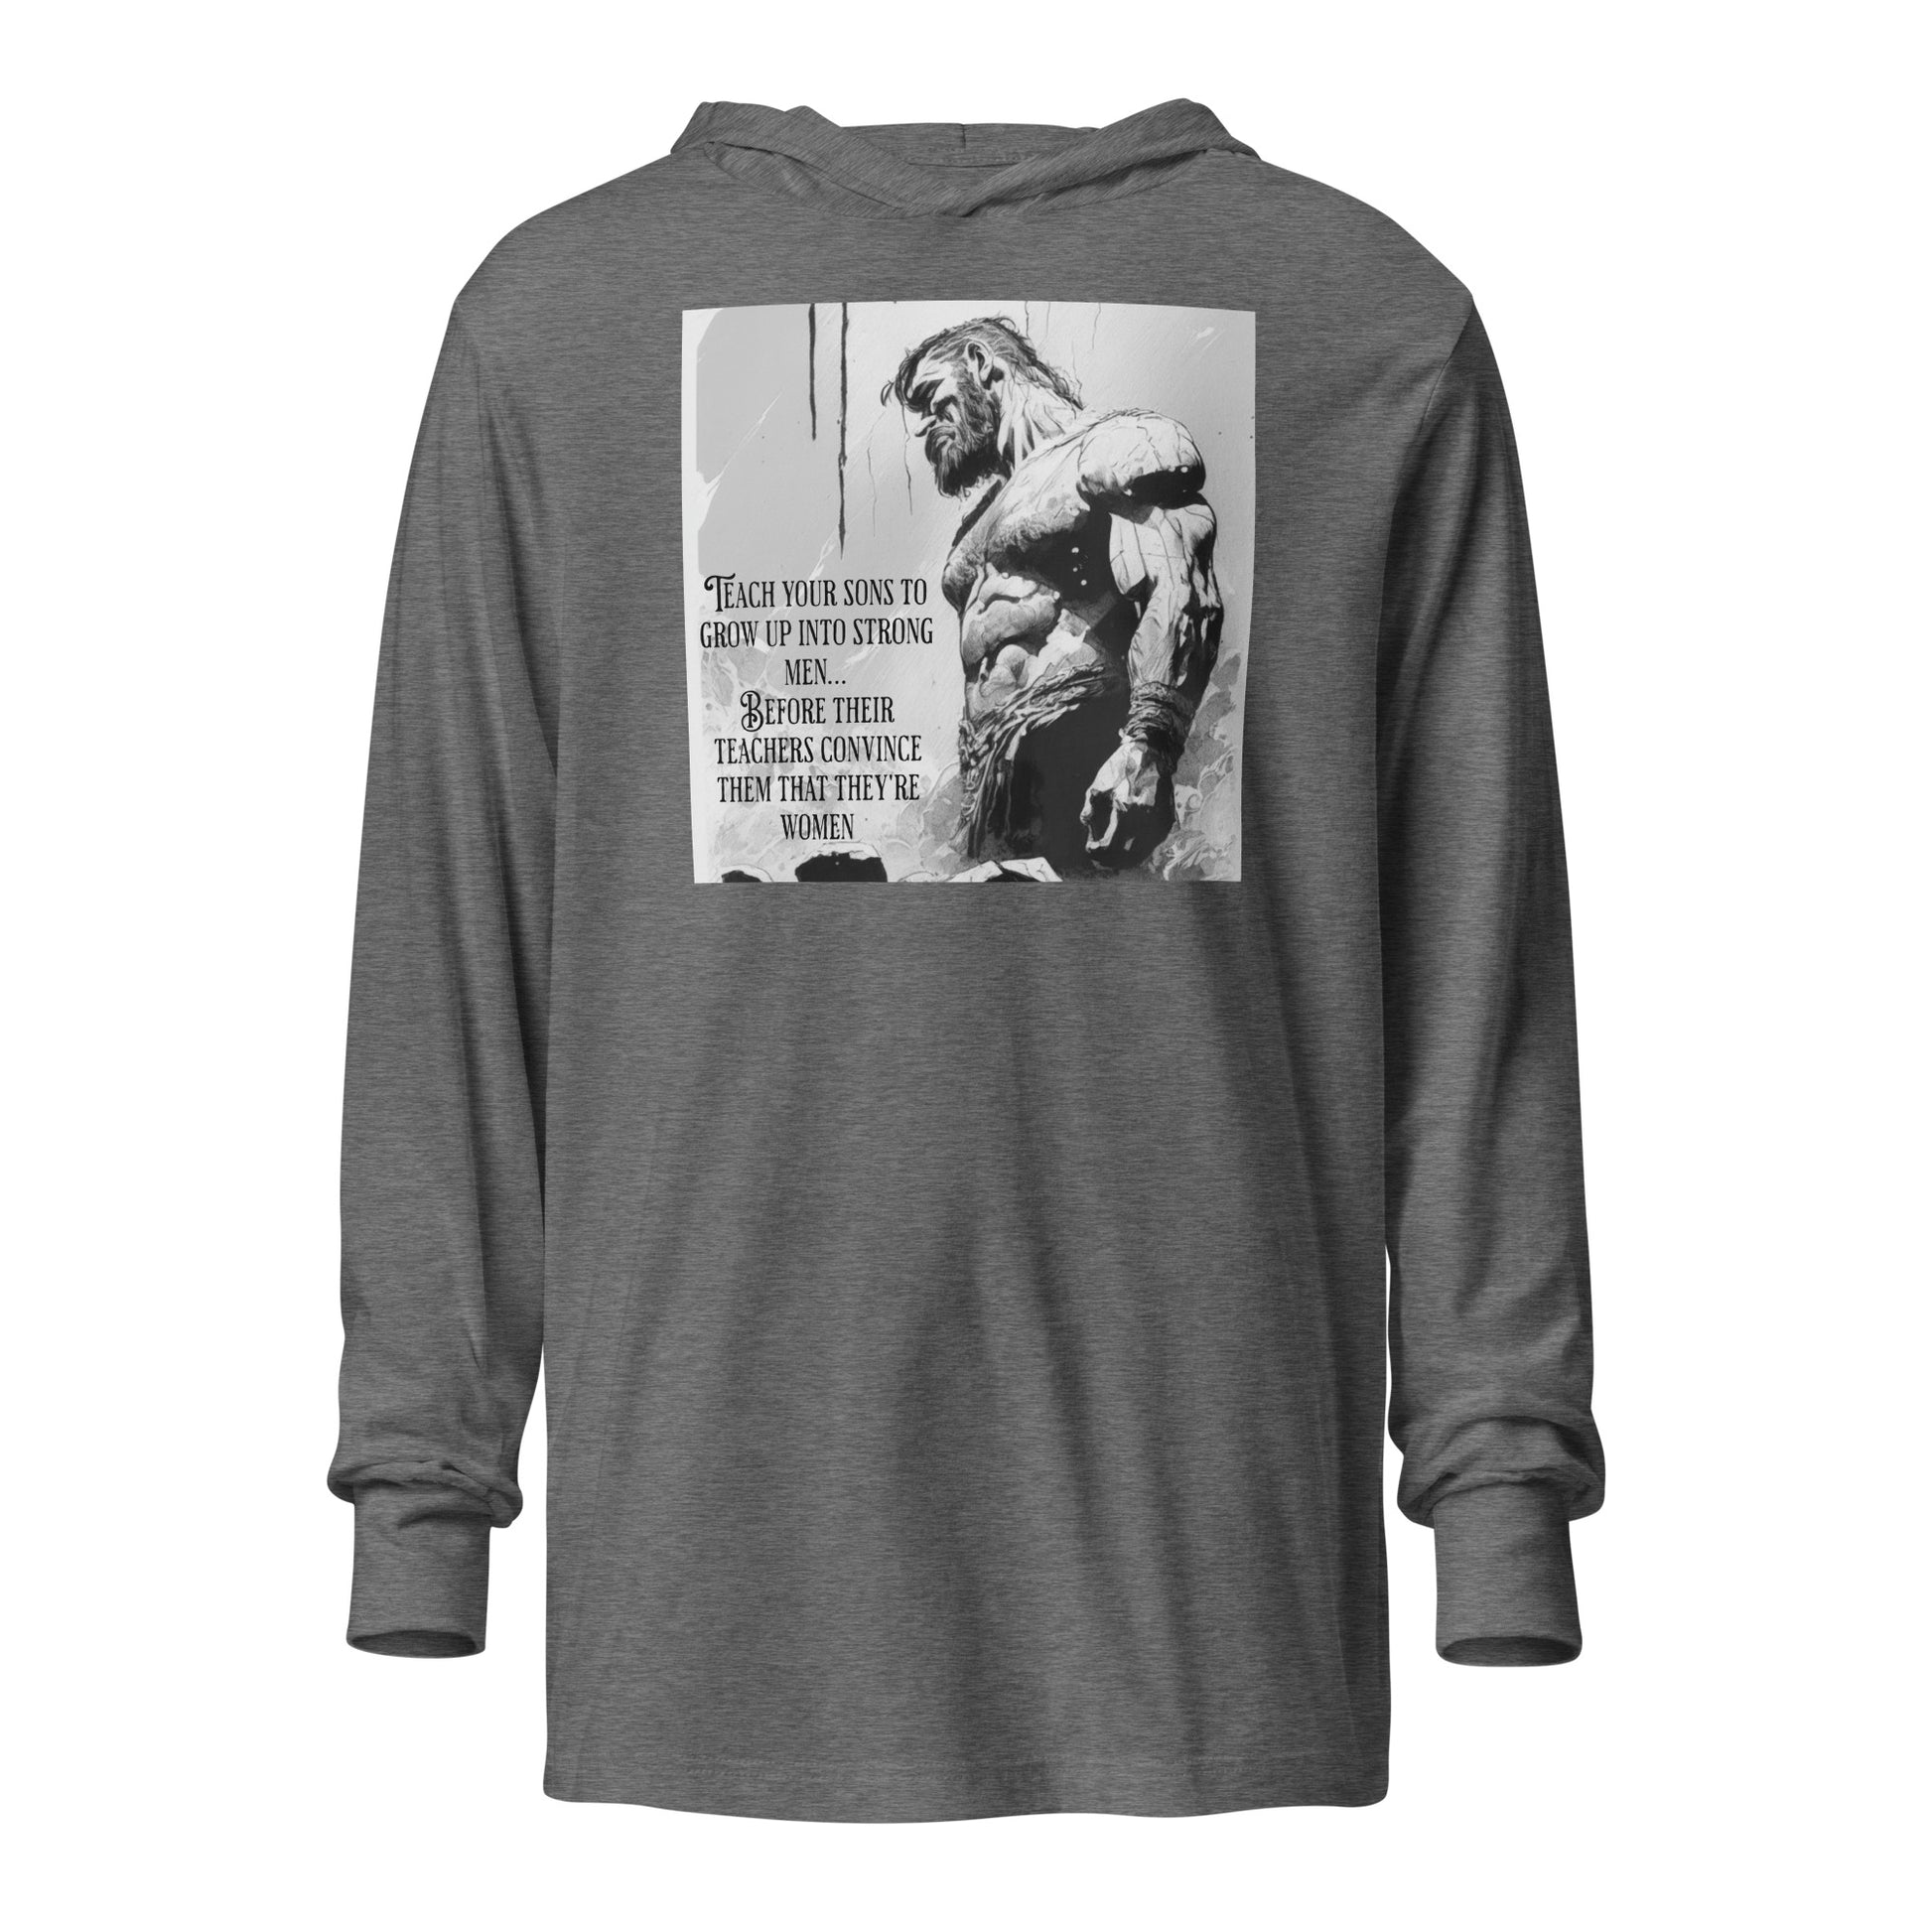 Raise Strong Men Graphic Men's Hooded Long-Sleeve Tee Grey Triblend